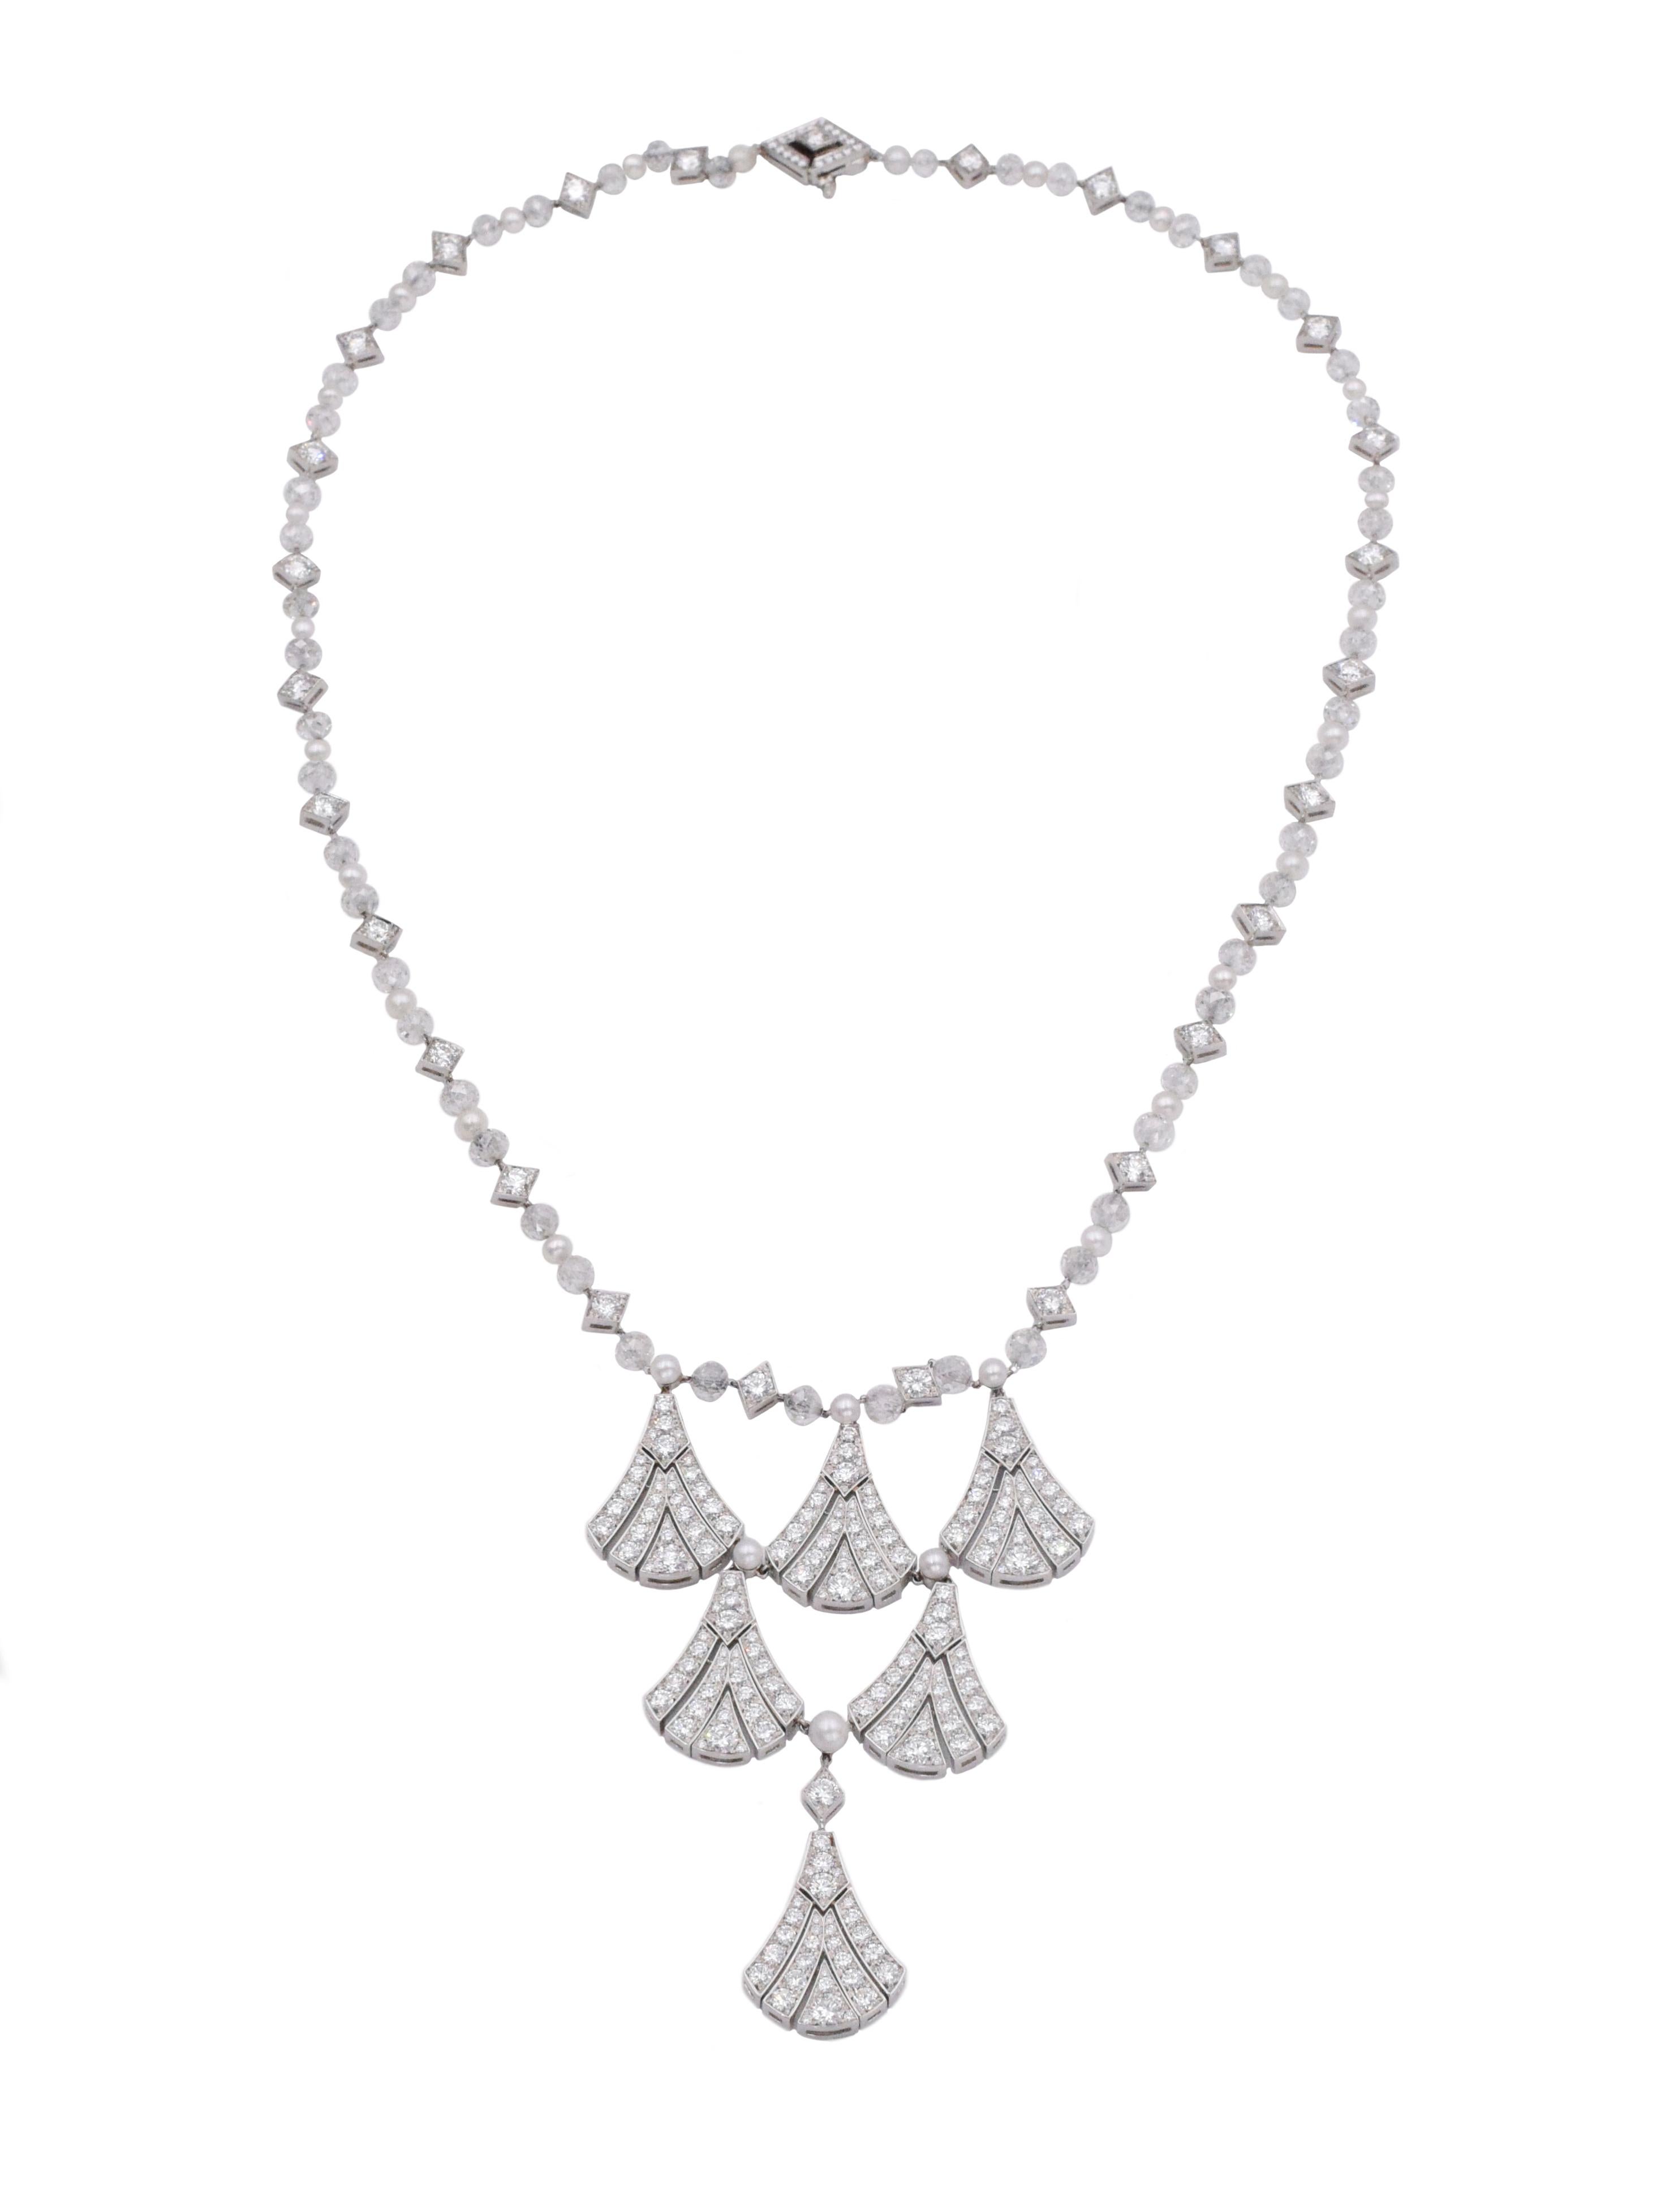 Tiffany & Co.  Diamond and cultured pearl necklace. Suspending six cascading fan motifs set with round diamonds, weigh a total of 11.59 carats, are near colorless & VS clarity. On a chain composed of faceted diamond beads alternating with lozenge